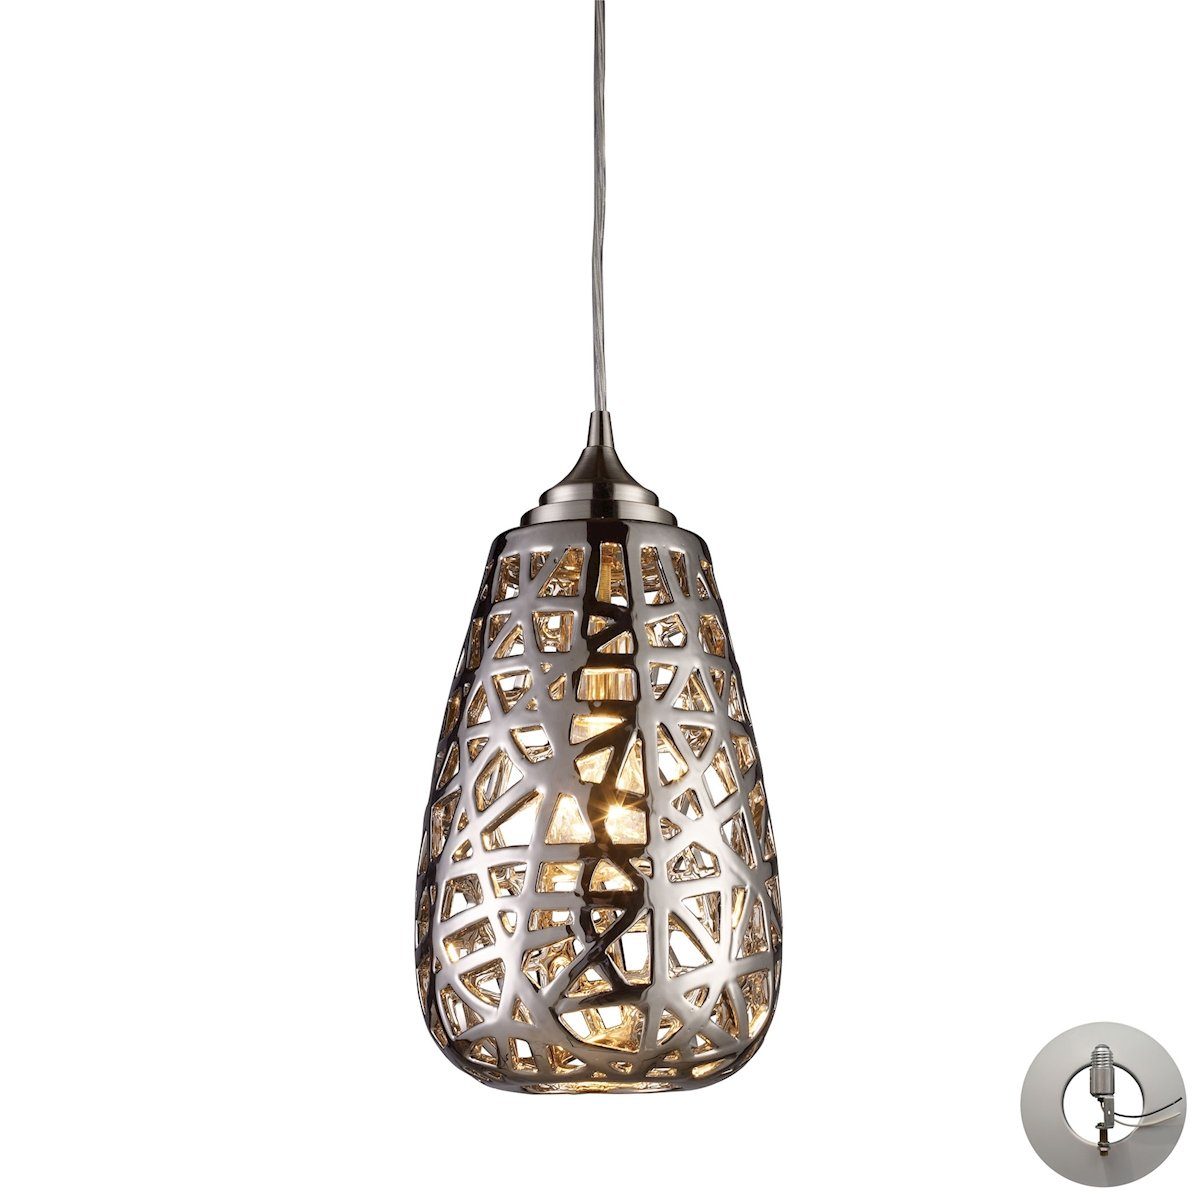 Nestor Pendant In Polished Chrome And Chrome Plated Ceramic Shade - Includes Recessed Lighting Kit Ceiling Elk Lighting 